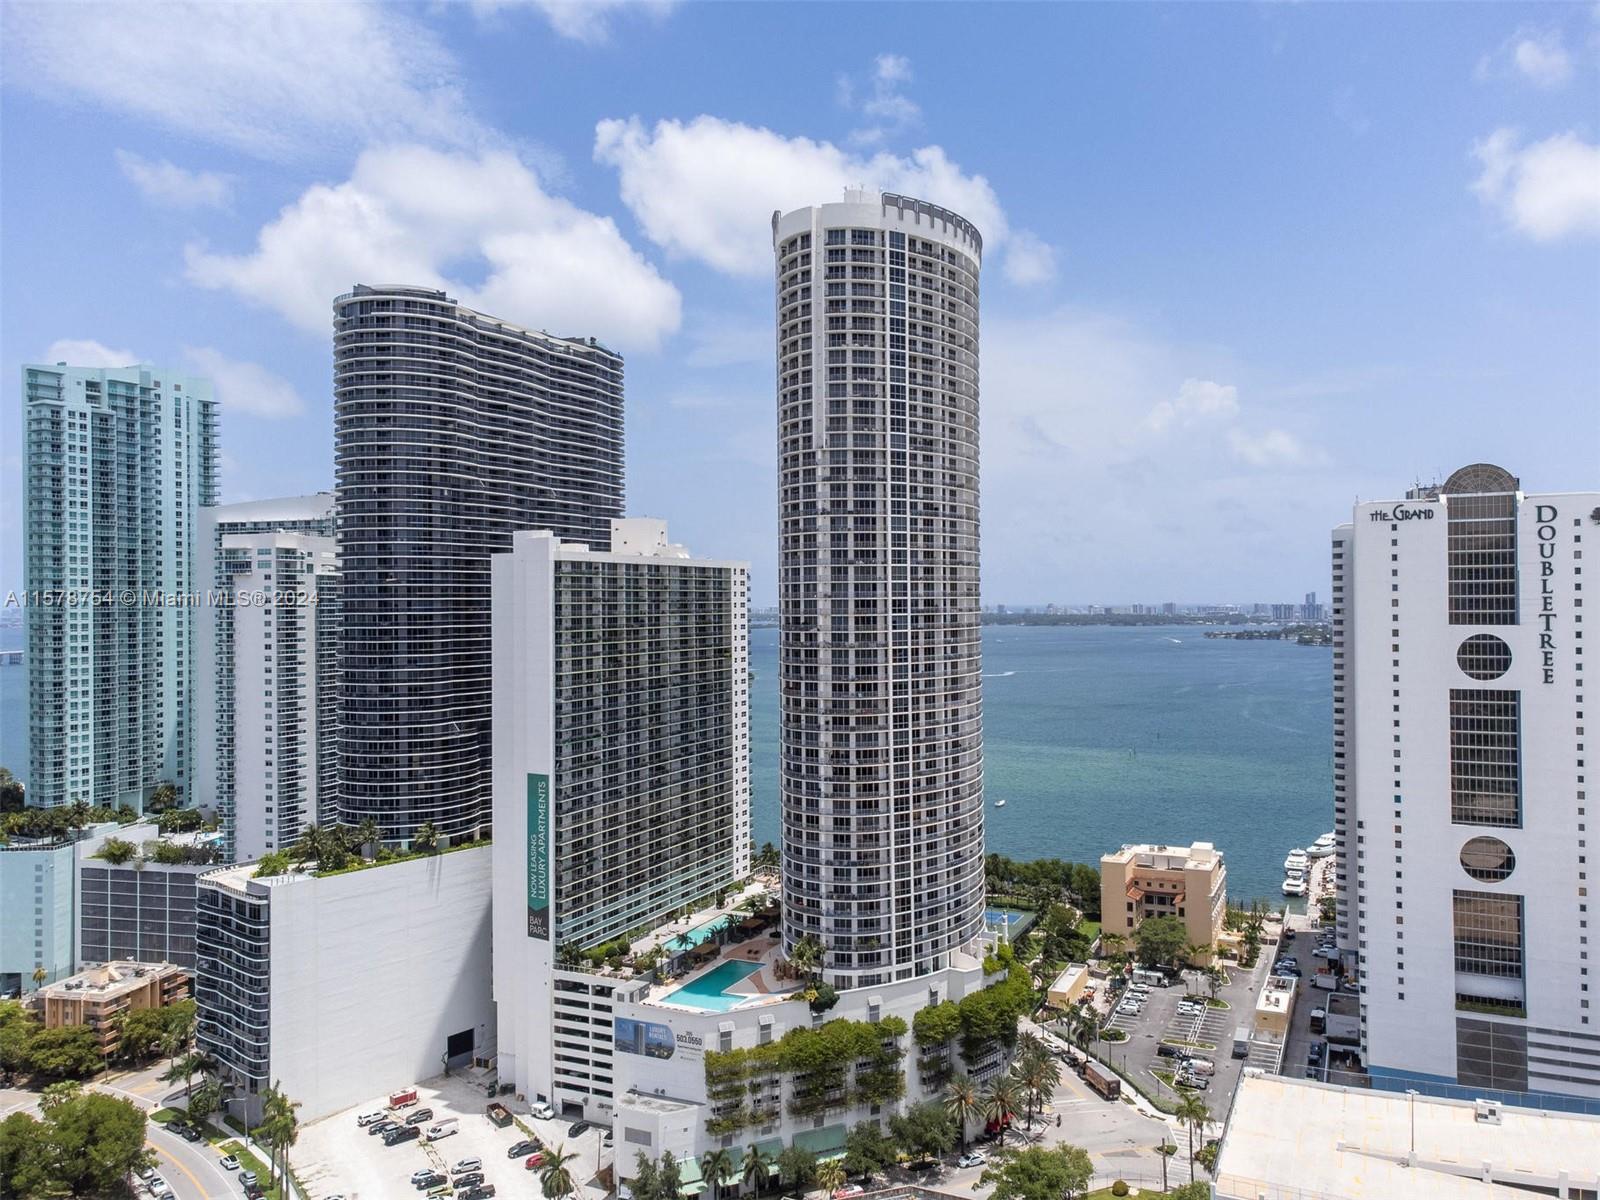 Beautifully furnished 1 bedroom condo at Opera Tower! Enjoy the Miami skyline and partial bay views from your wall-to-wall balcony! Ceramic floor, floor-to-ceiling sliding glass doors, & walk-in closet. Amenities include newly renovated pool and gym, 2 Jacuzzis, business center, clubroom & media room, BBQ area, 24-hr security/lobby & assigned/covered garage. Opera Tower also has a convenience store, dry cleaners, hair salon, & restaurant on its ground floor. Live across from beautiful Margaret Pace Park w/walking path, soccer fields, tennis & volleyball courts. Walk to Publix, Miami Trolley, local trendy restaurants, shops, museums, galleries & concerts. Minutes to Midtown, Wynwood, Brickell, Design District & Miami Beaches! 30-day short-term rentals allowed, 12 times a year.